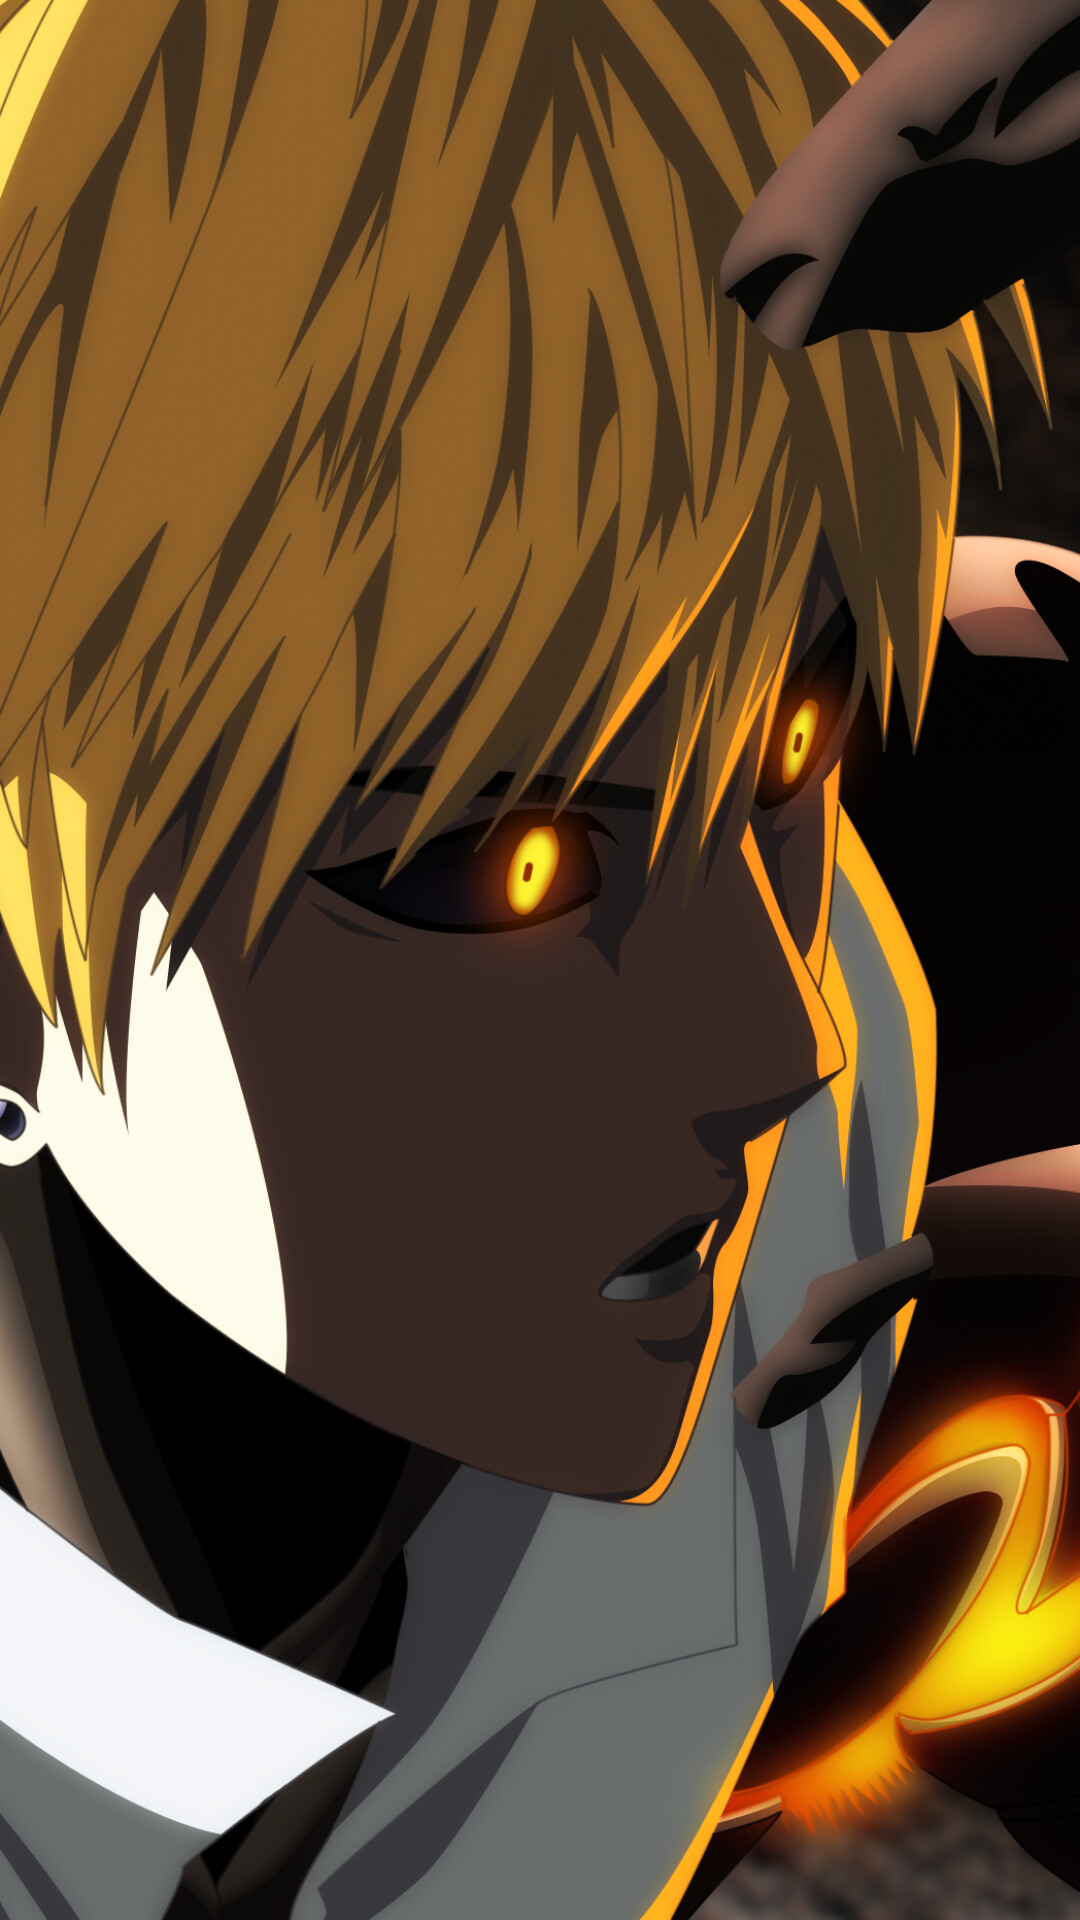 Genos: Demon Cyborg, Ranked 4th in the popularity poll in Anime One-Punch Man. 1080x1920 Full HD Wallpaper.